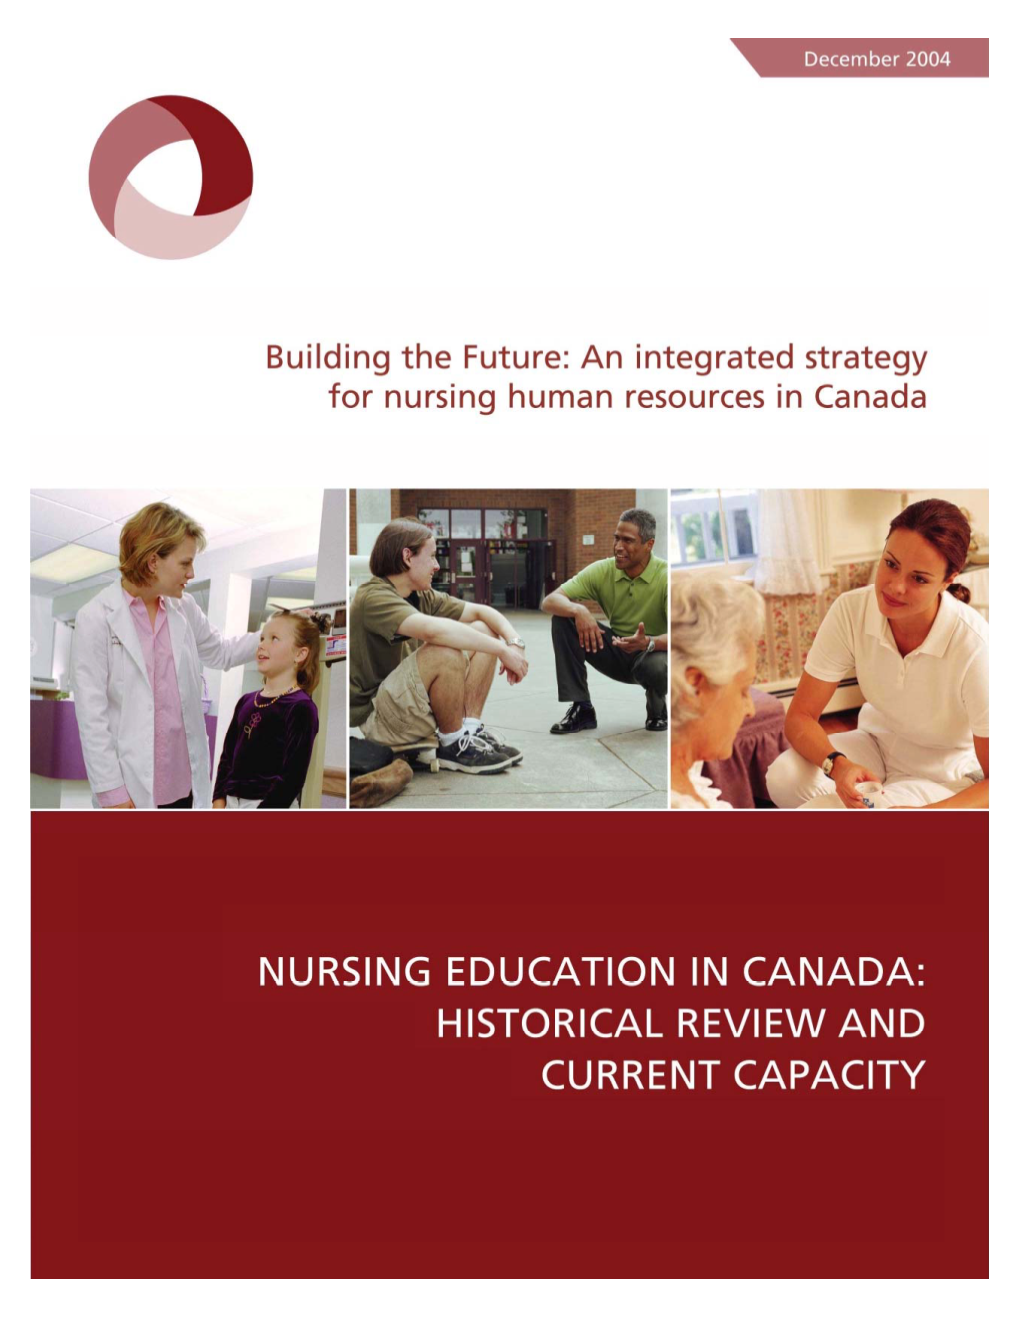 Nursing Education in Canada: Historical Review and Current Capacity